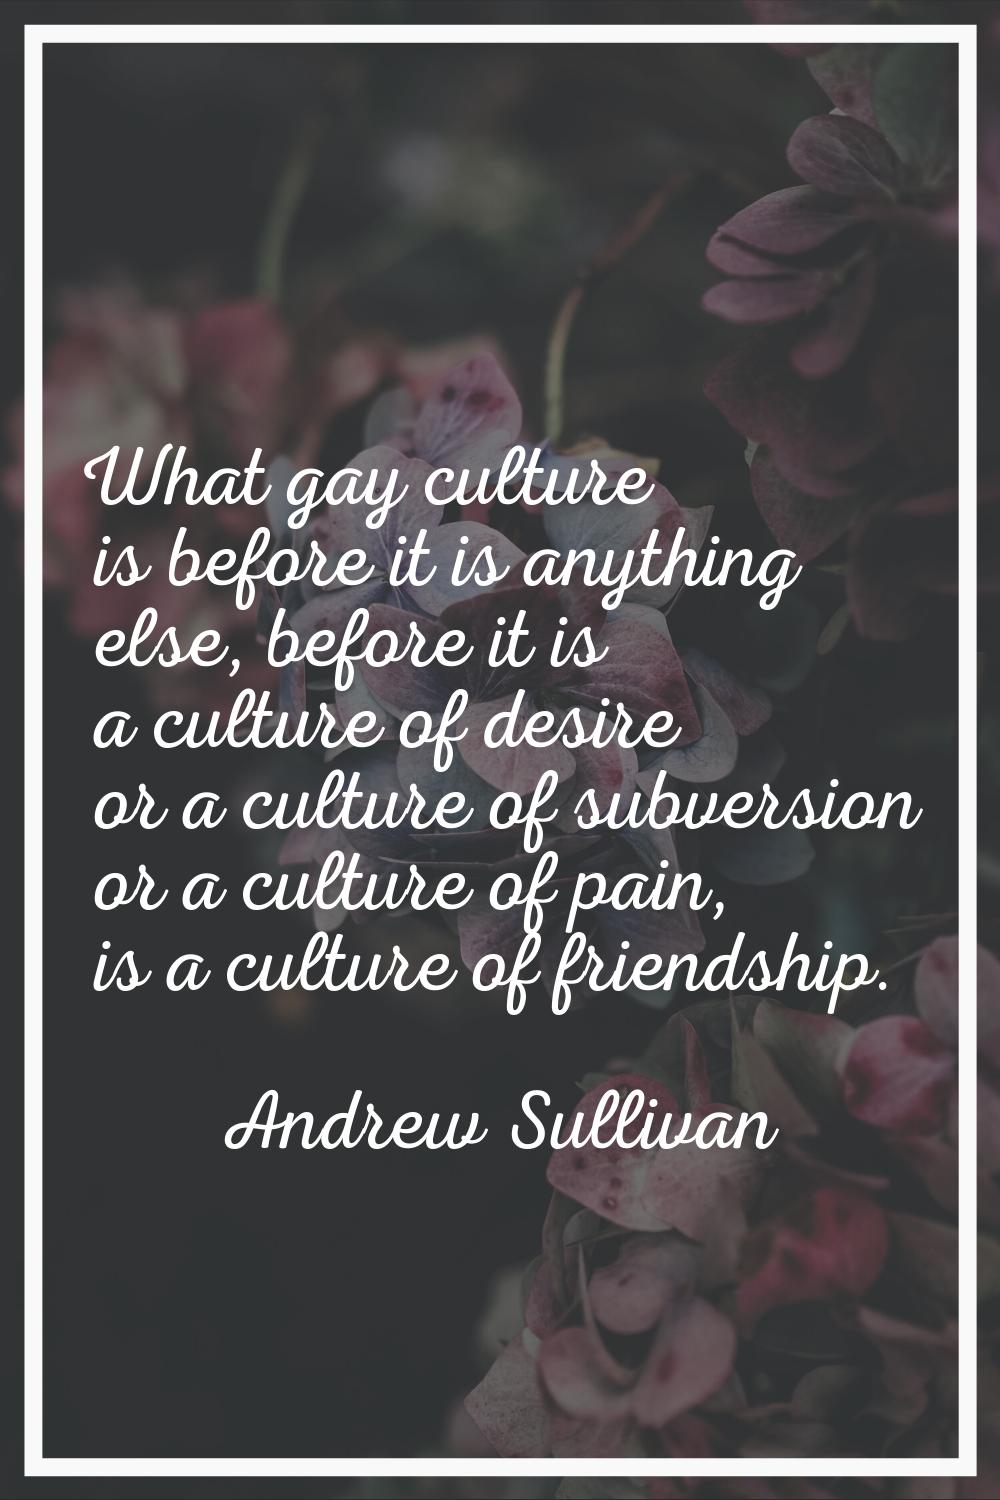 What gay culture is before it is anything else, before it is a culture of desire or a culture of su